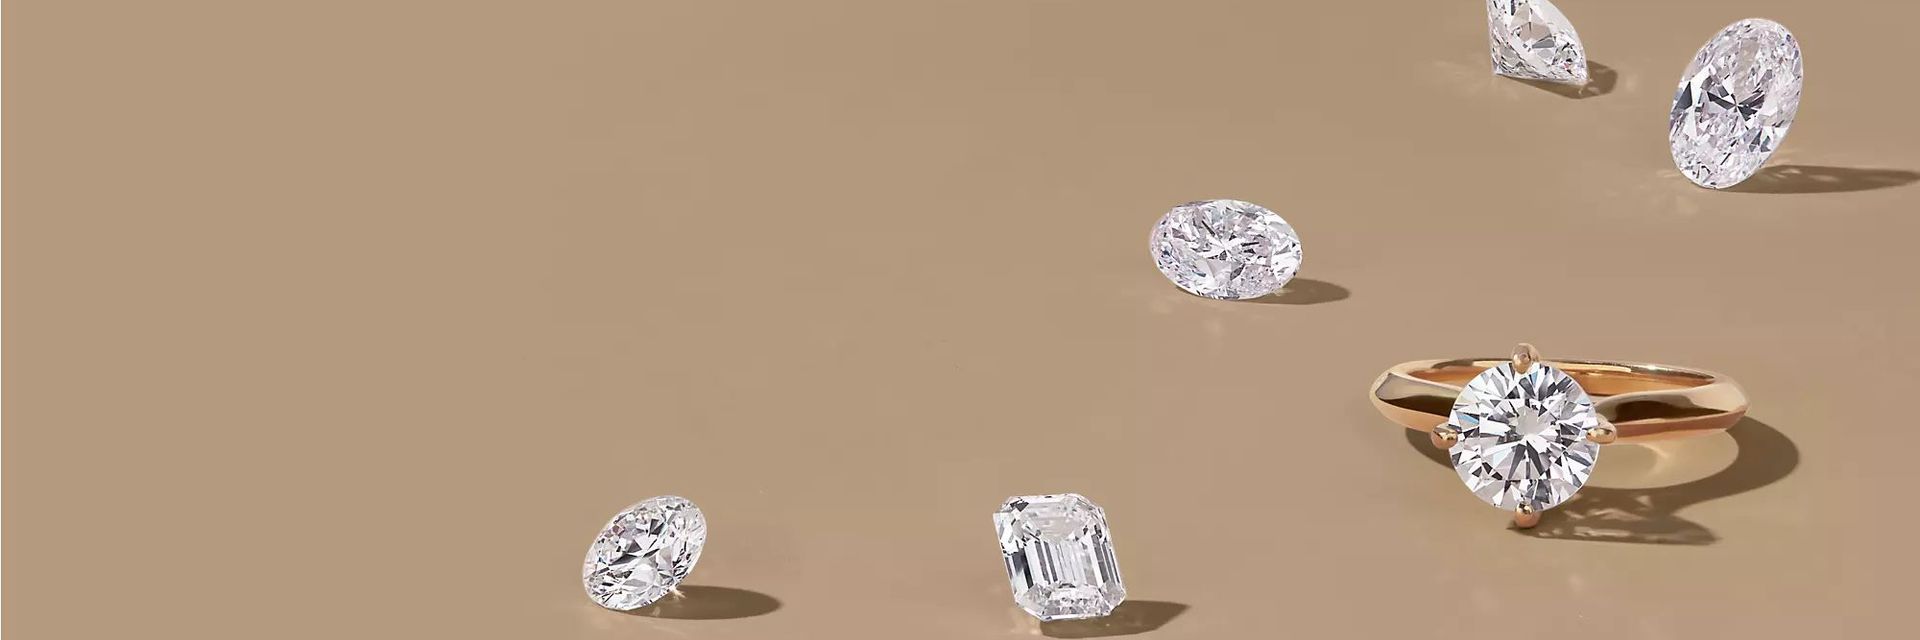 5 Diamond Jewellery Must-haves for Men - Only Natural Diamonds 5